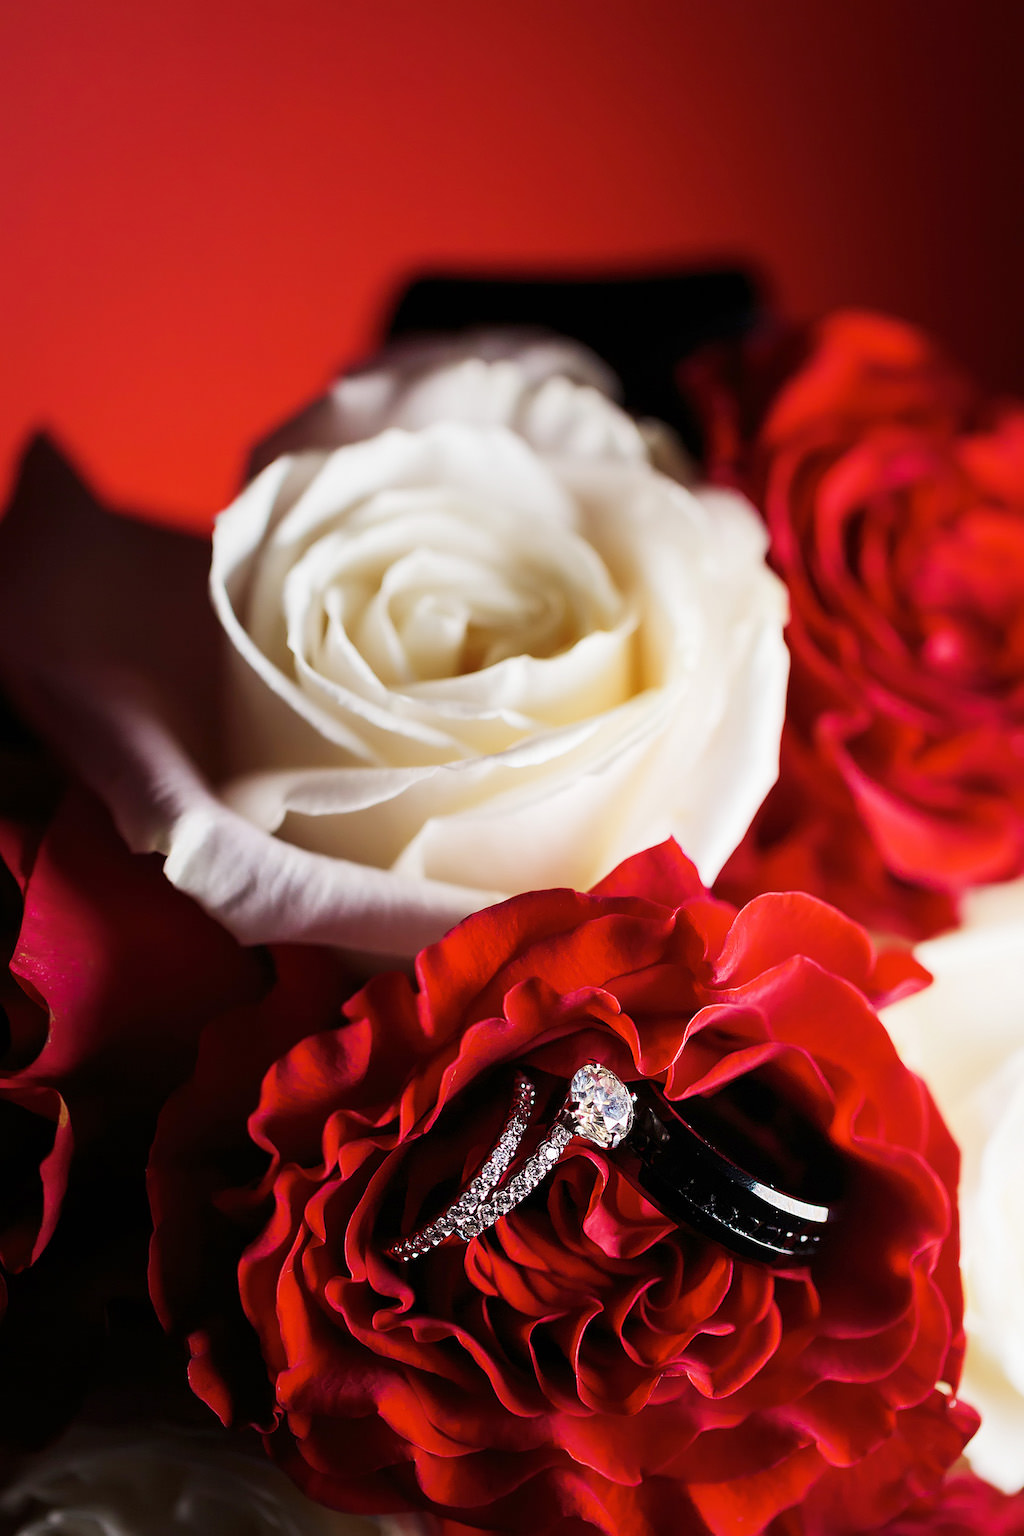 Diamond Solitaire Wedding Ring and Black Band, Red and White Roses